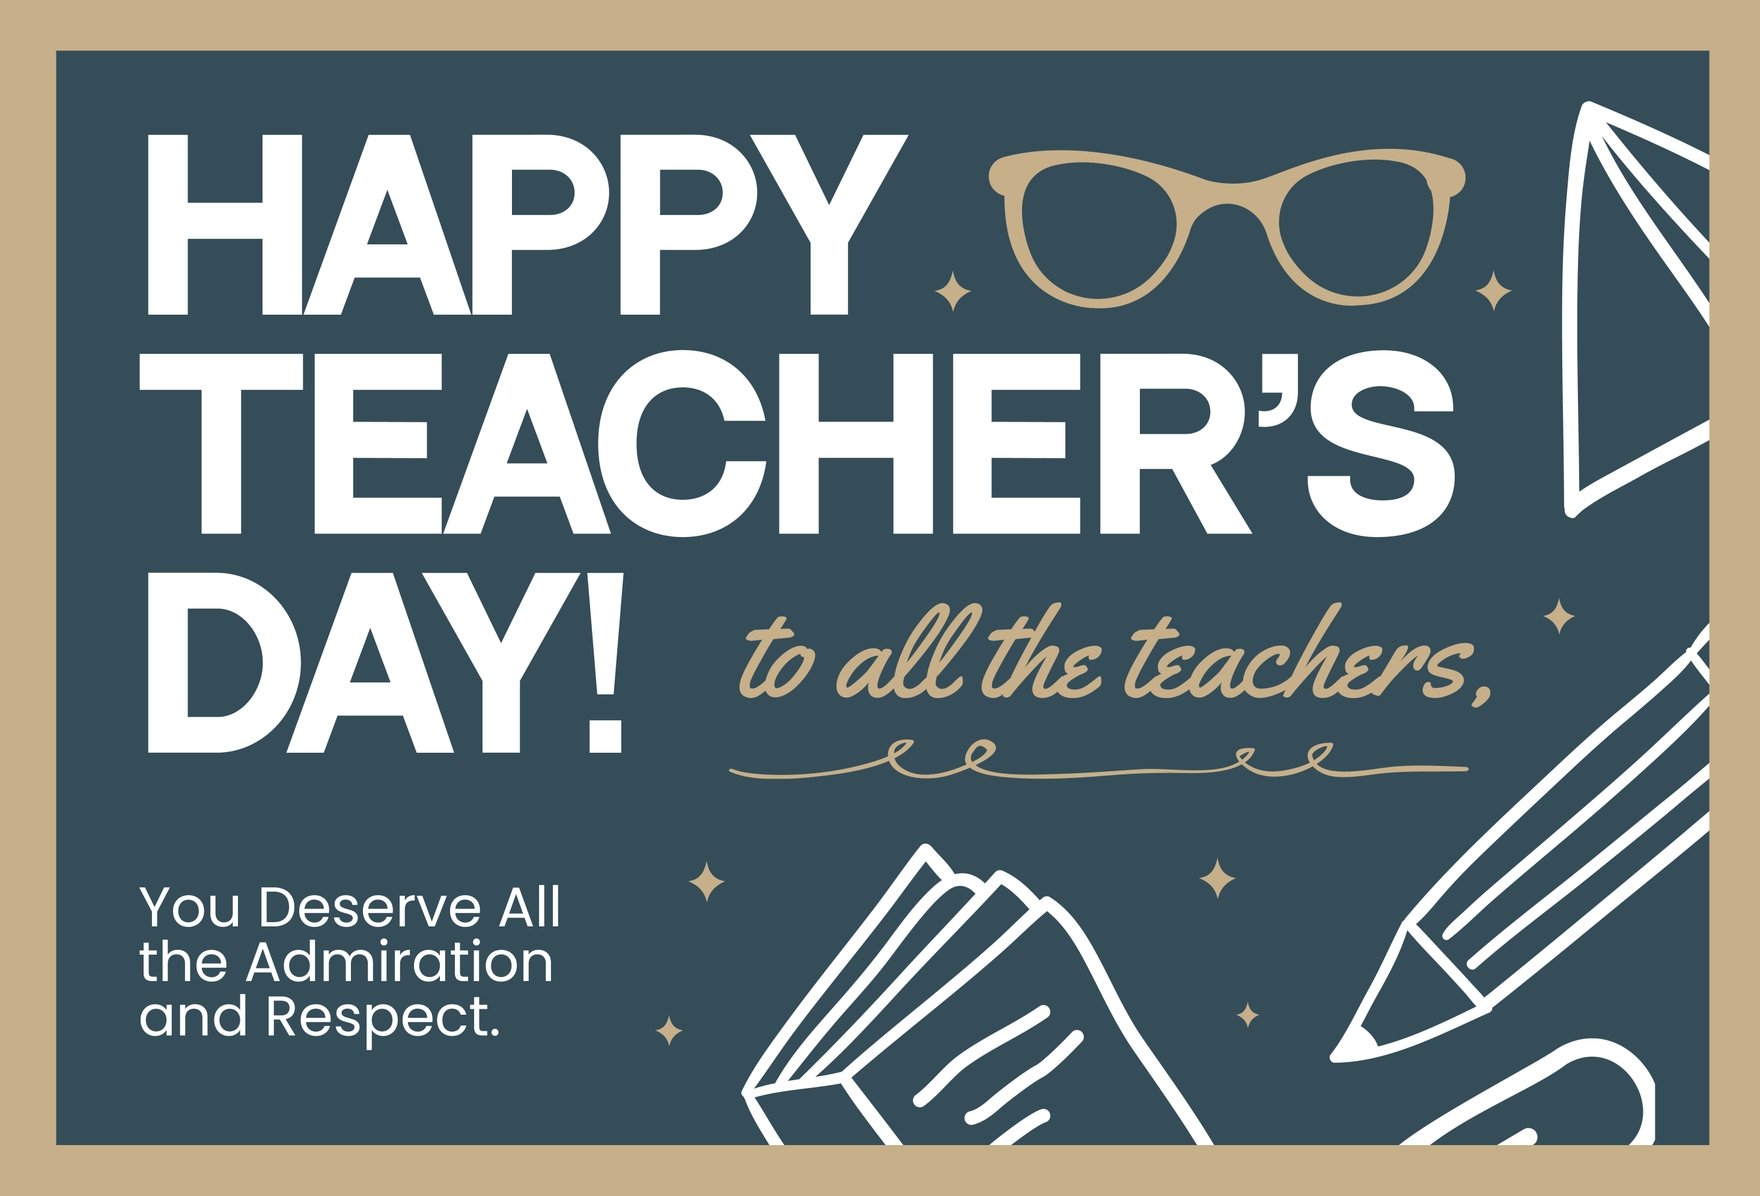 Happy Teacher's Day Messages Wishes in Word, Illustrator, PSD